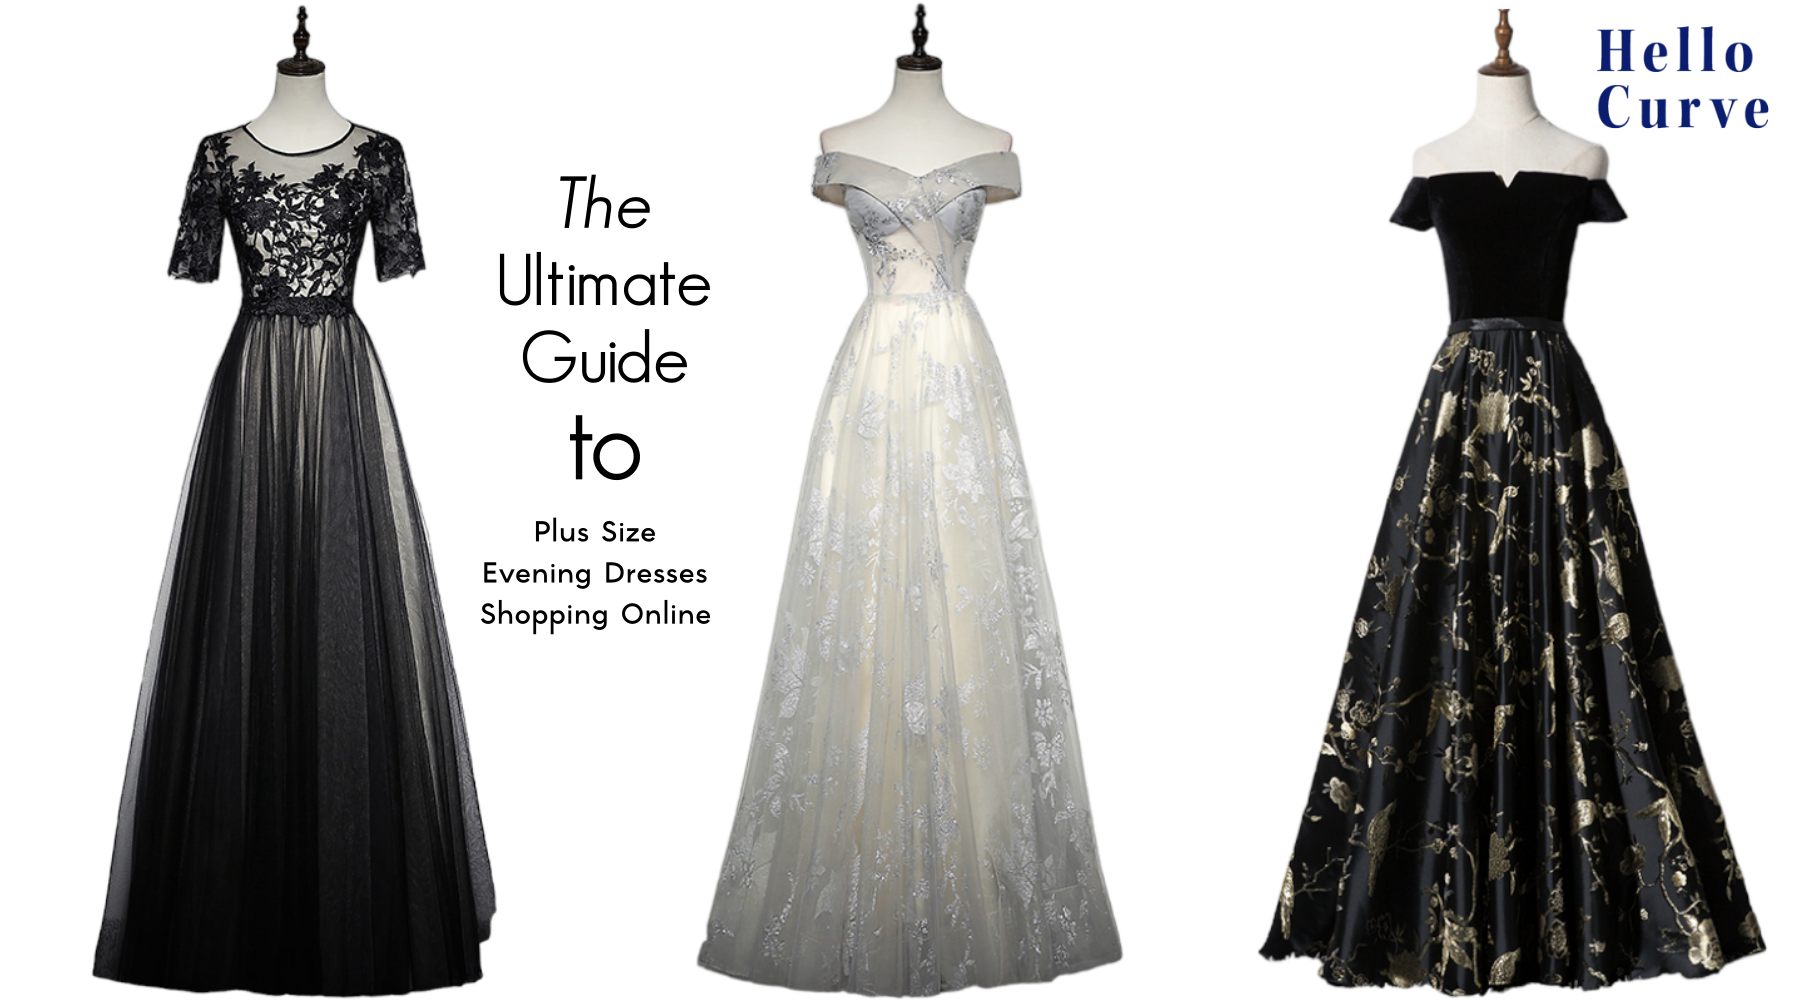 THE Go-to Guide to Plus Size Evening Dress Shopping Online